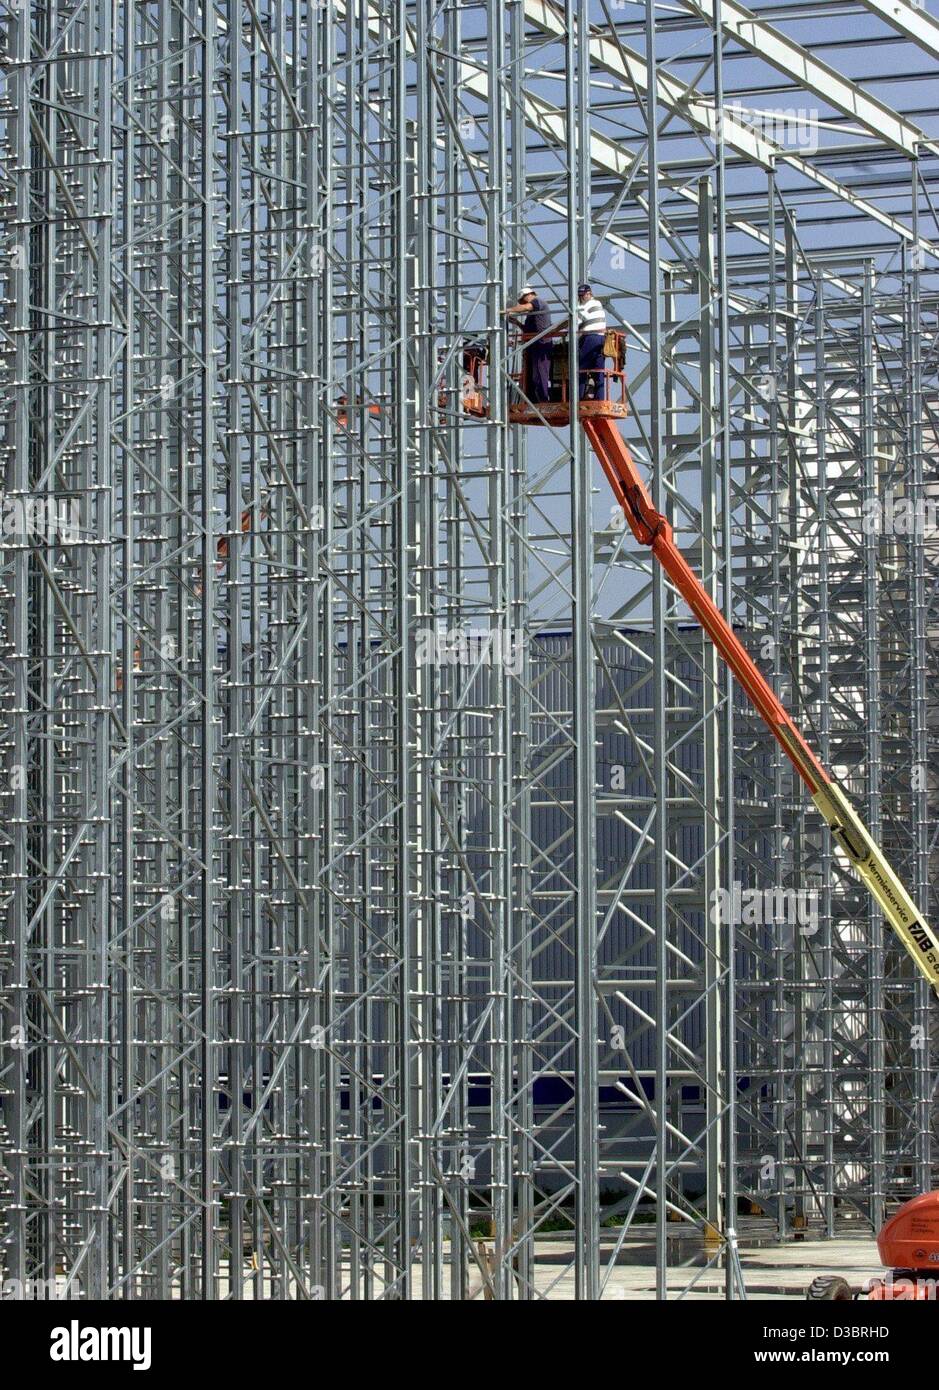 (dpa) - Fitters work on the construction of a new high bay racking for the Italian company Nordlam in Magdeburg, Germany, 18 September 2003. Nordlam has invested 40 million euros in its location in Magdeburg in the last two years, where around 100 new jobs have been added. The company produces lamin Stock Photo